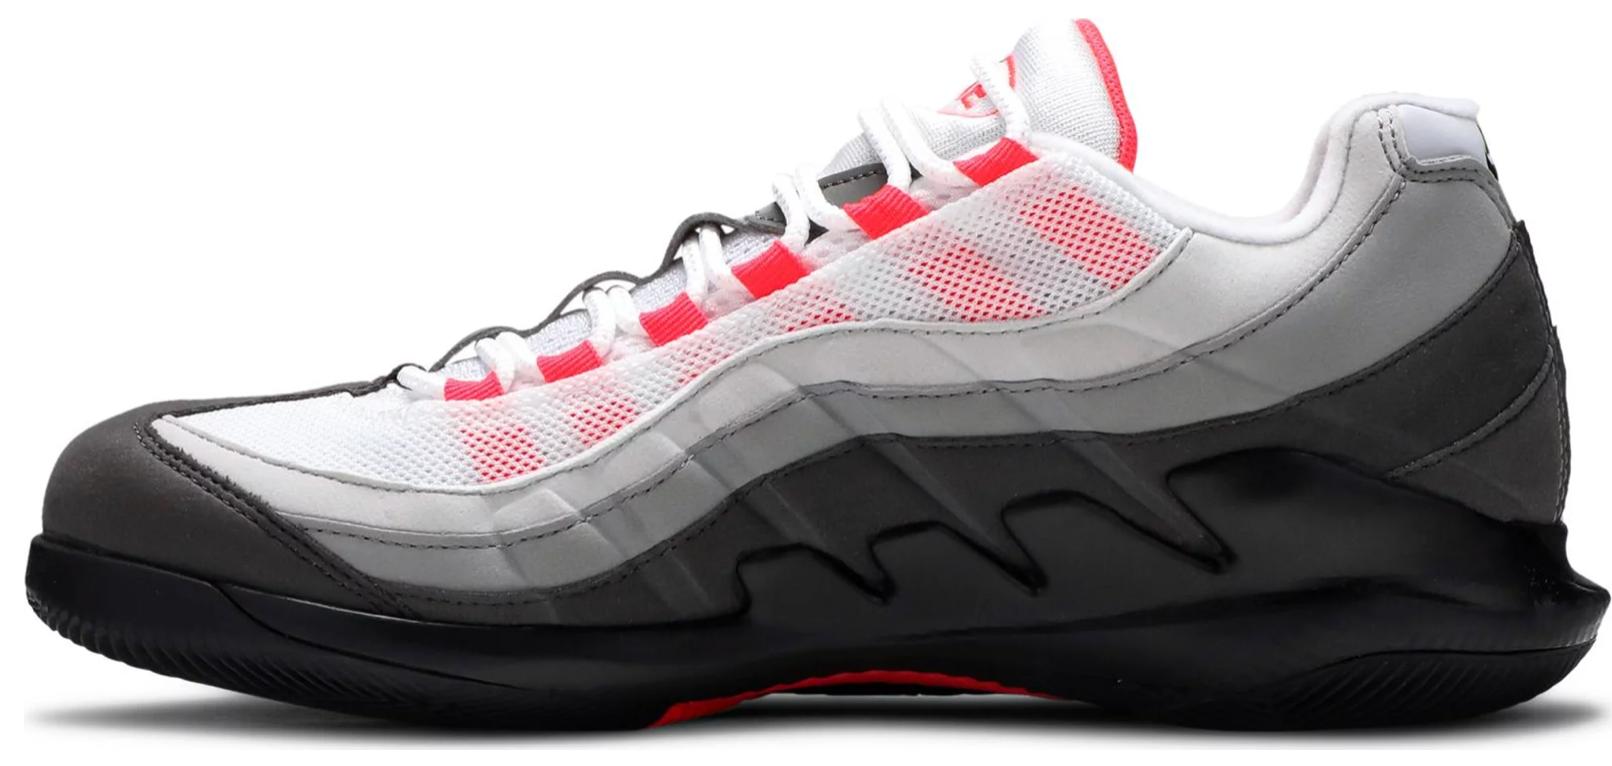 Nike Court Zoom Vapor X Air Max 95 Solar Red in Black | Lyst